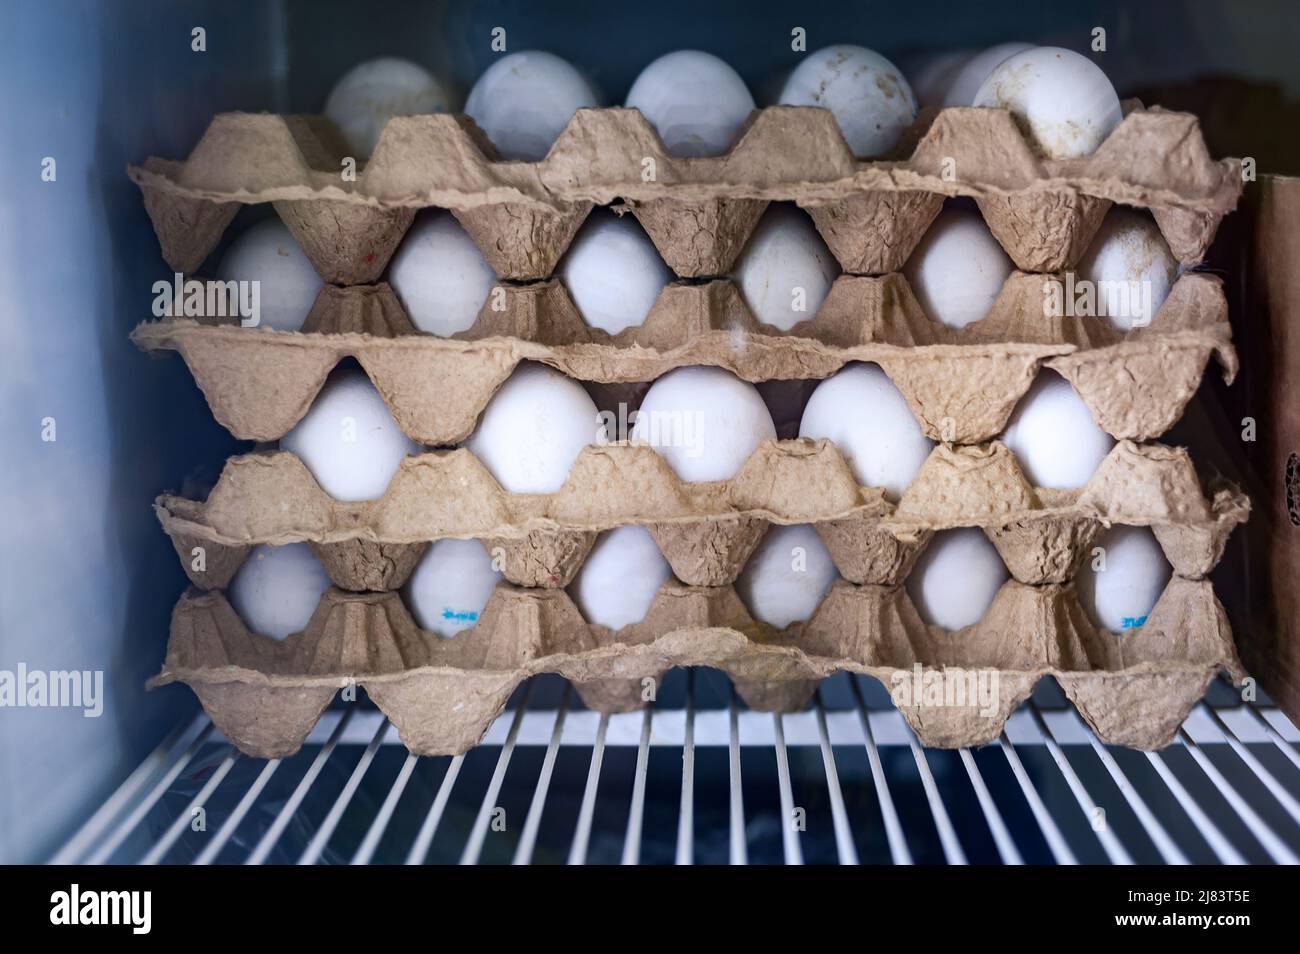 chicken eggs in cardboard trays close-up Stock Photo